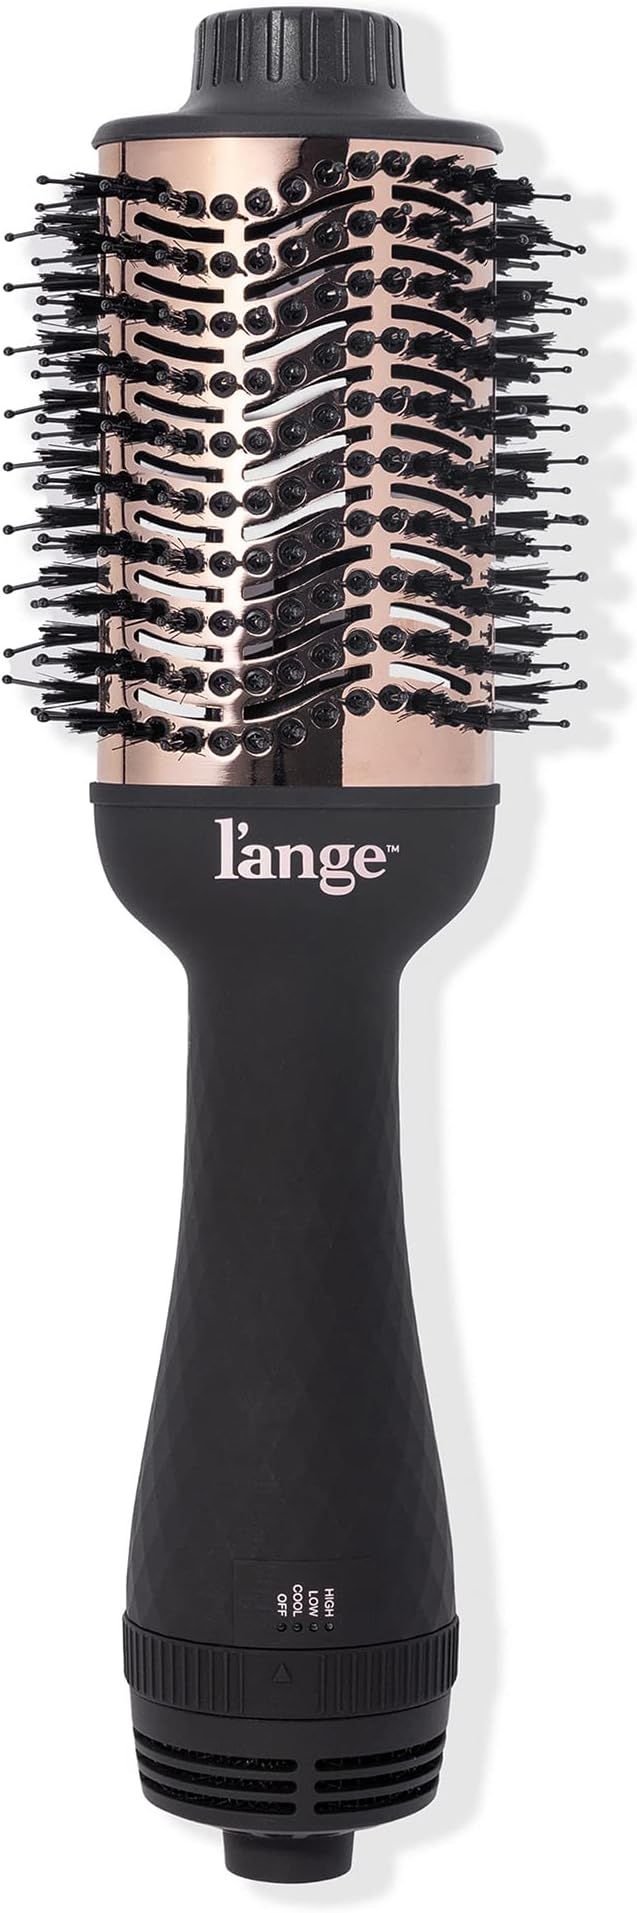 L'ANGE HAIR Le Volume 2-in-1 Titanium Brush Dryer Black | Hot Air Blow Dryer Brush in One with Ov... | Amazon (US)